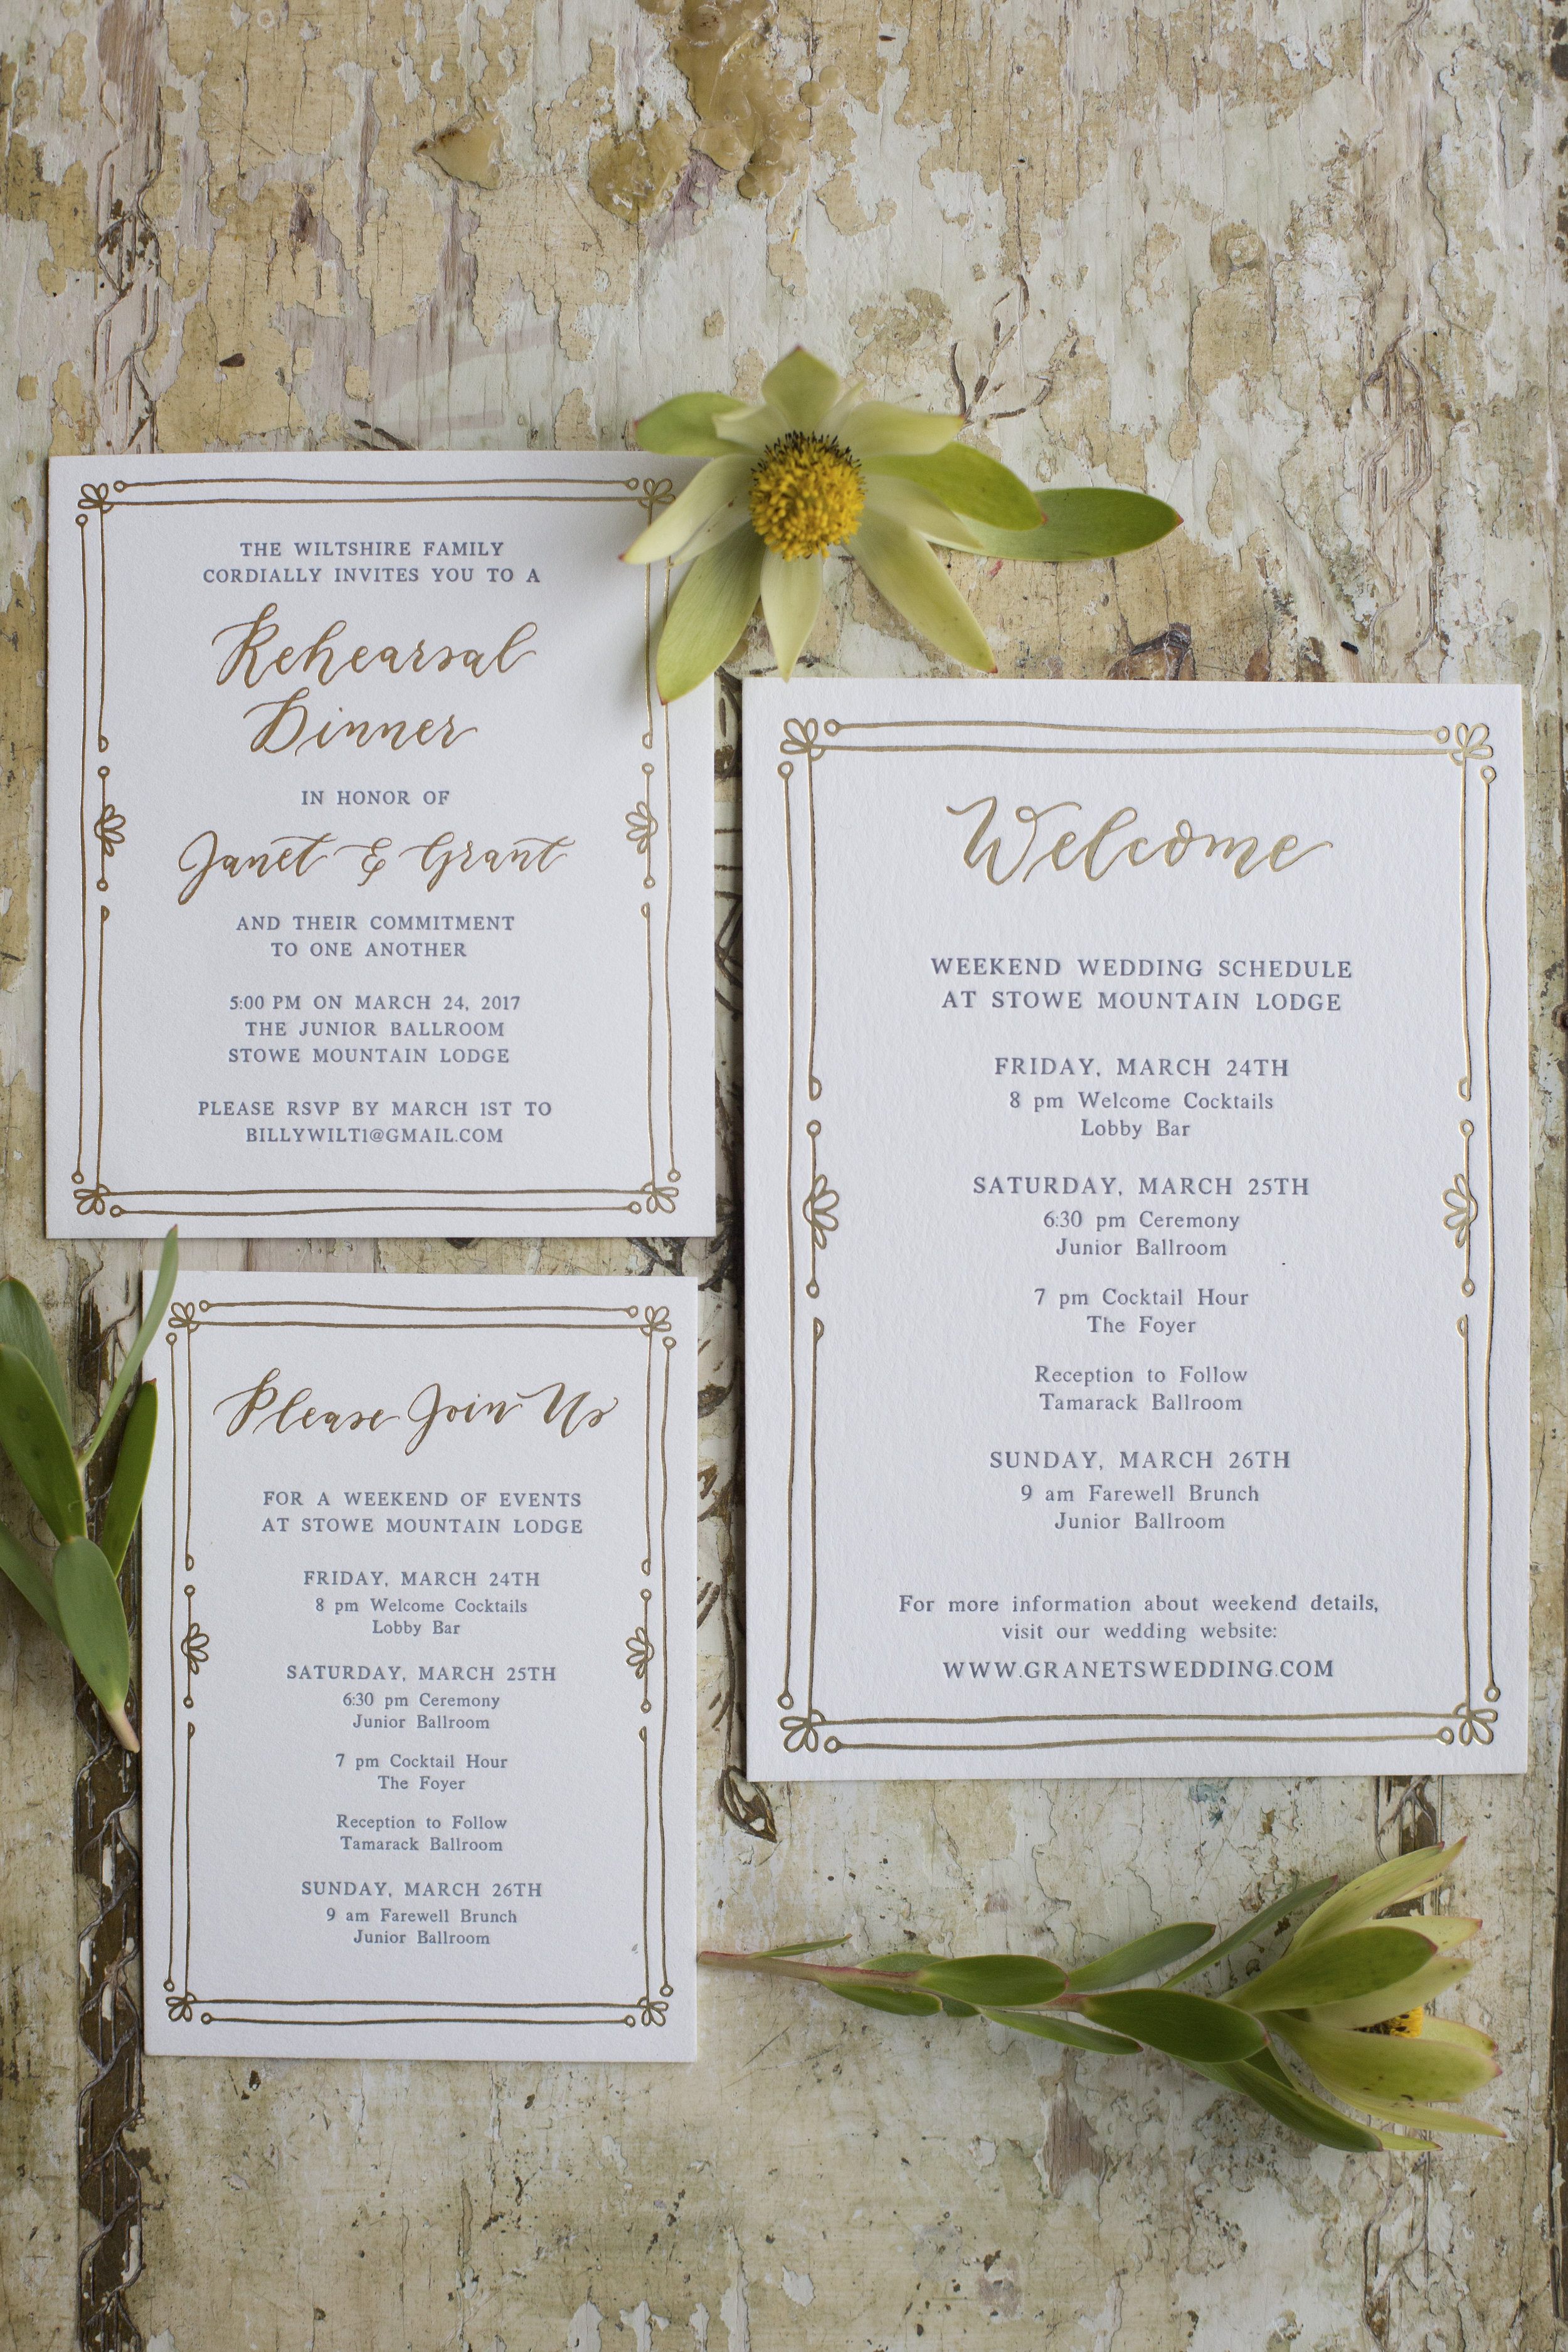 Copy of Vermont Marriage Invitation Card